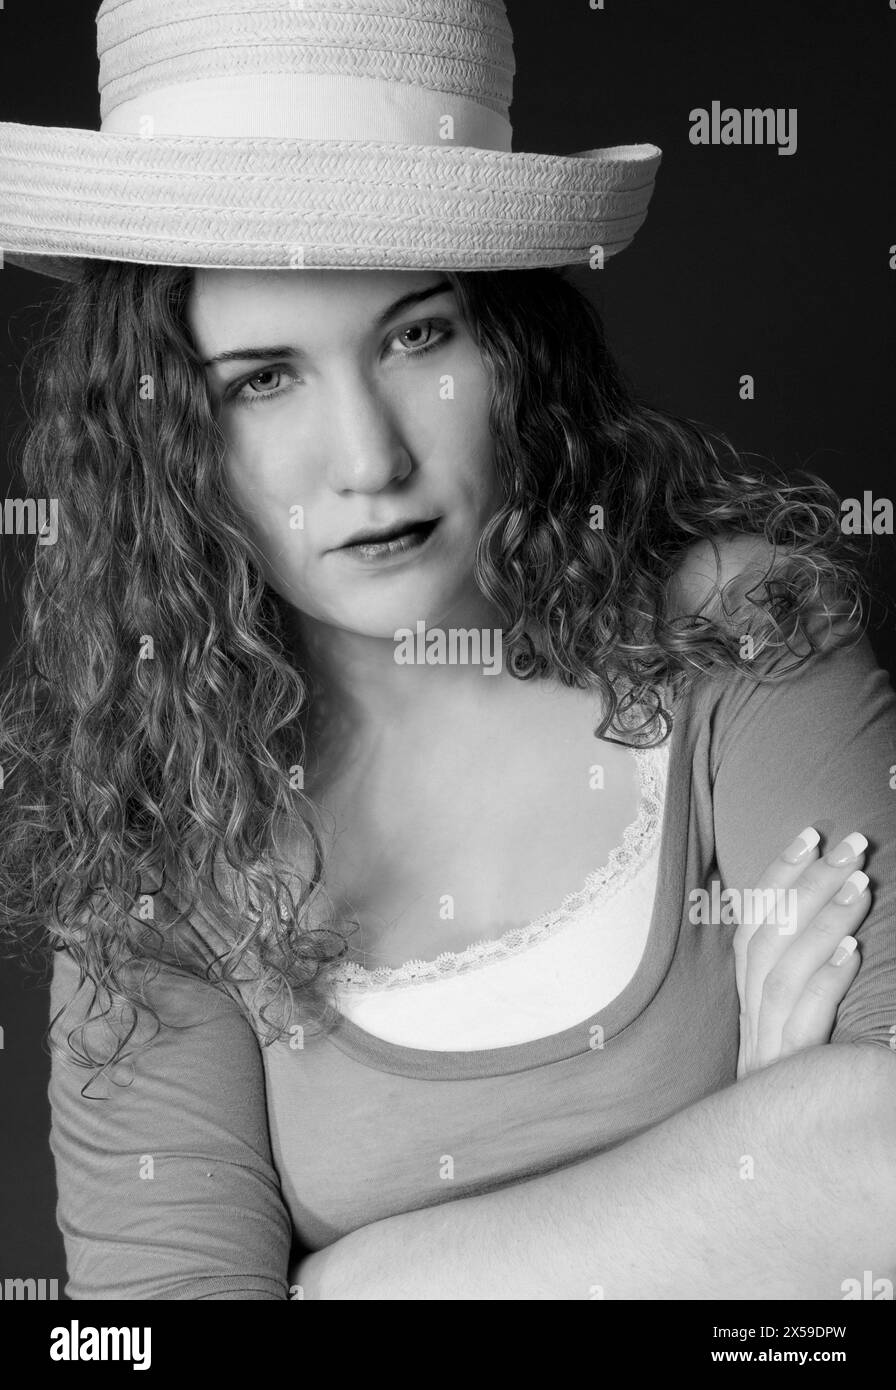 Stock photo of an angry young woman with arms crossed, wearing hat and looking into lens. USA Stock Photo